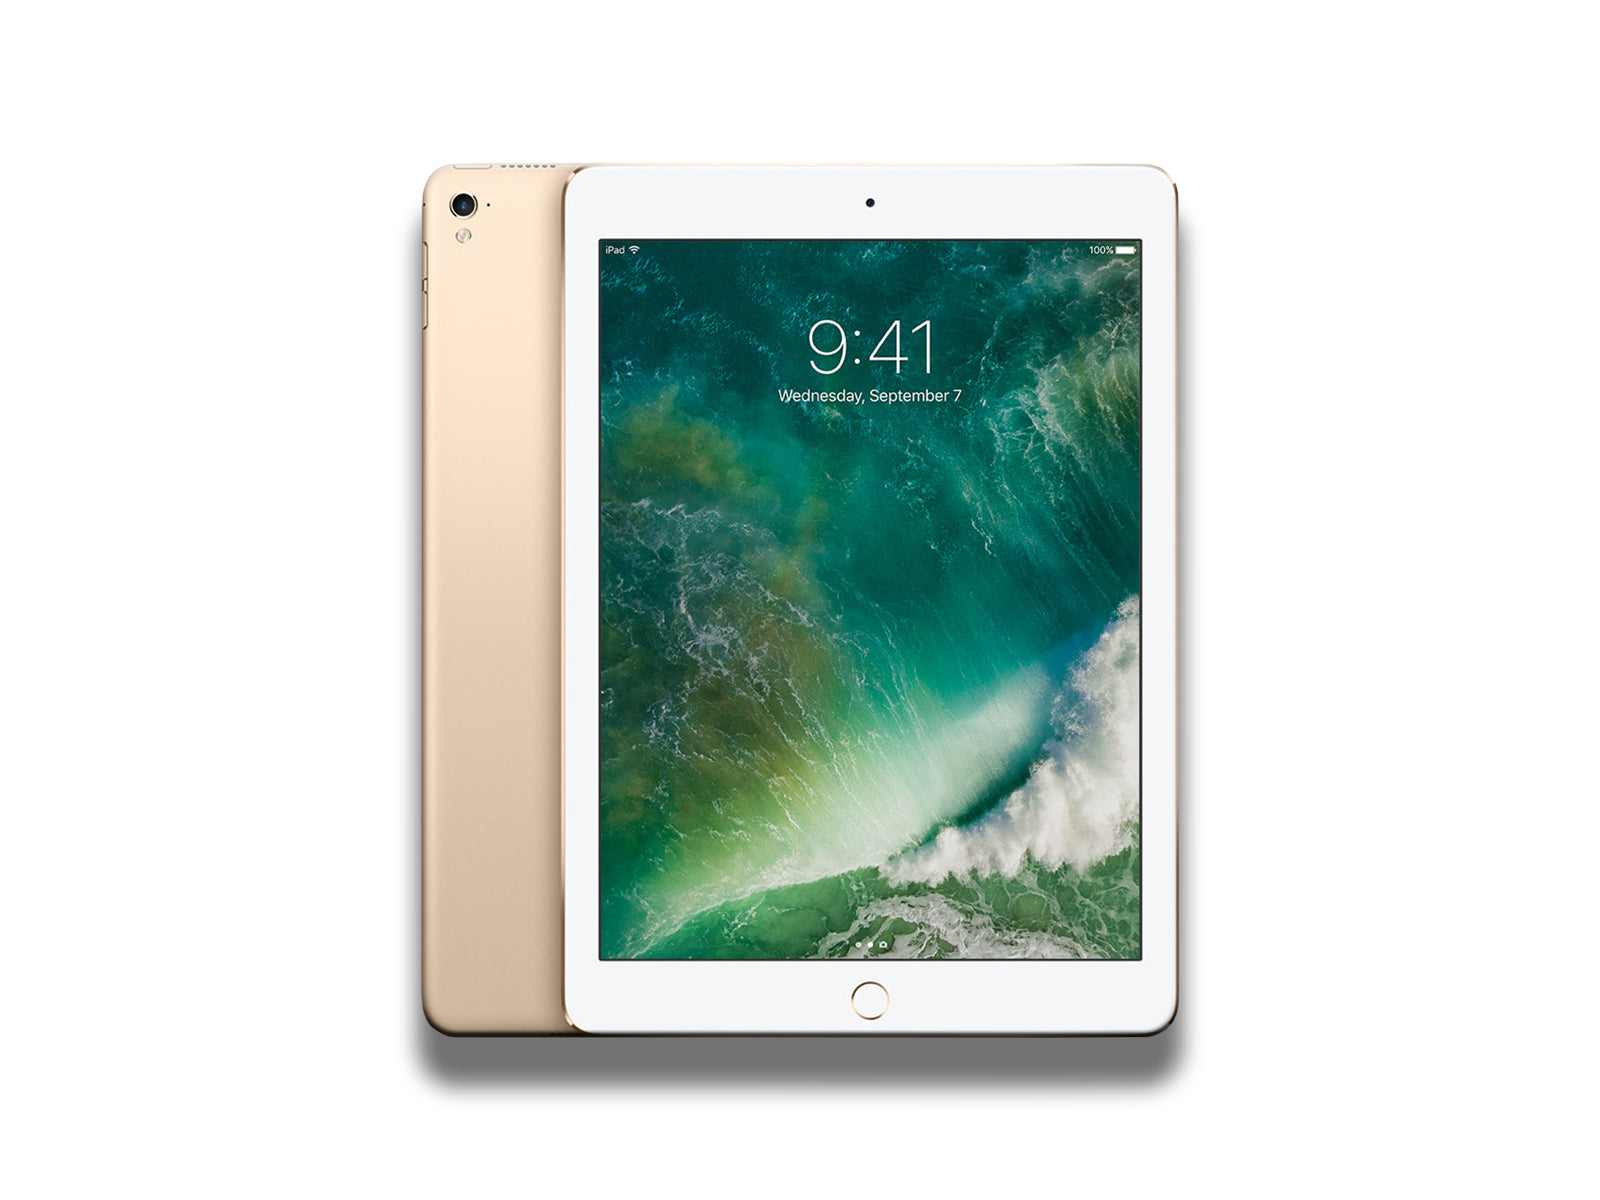 Apple iPad Pro 9.7" 2016 In Gold Front And Back